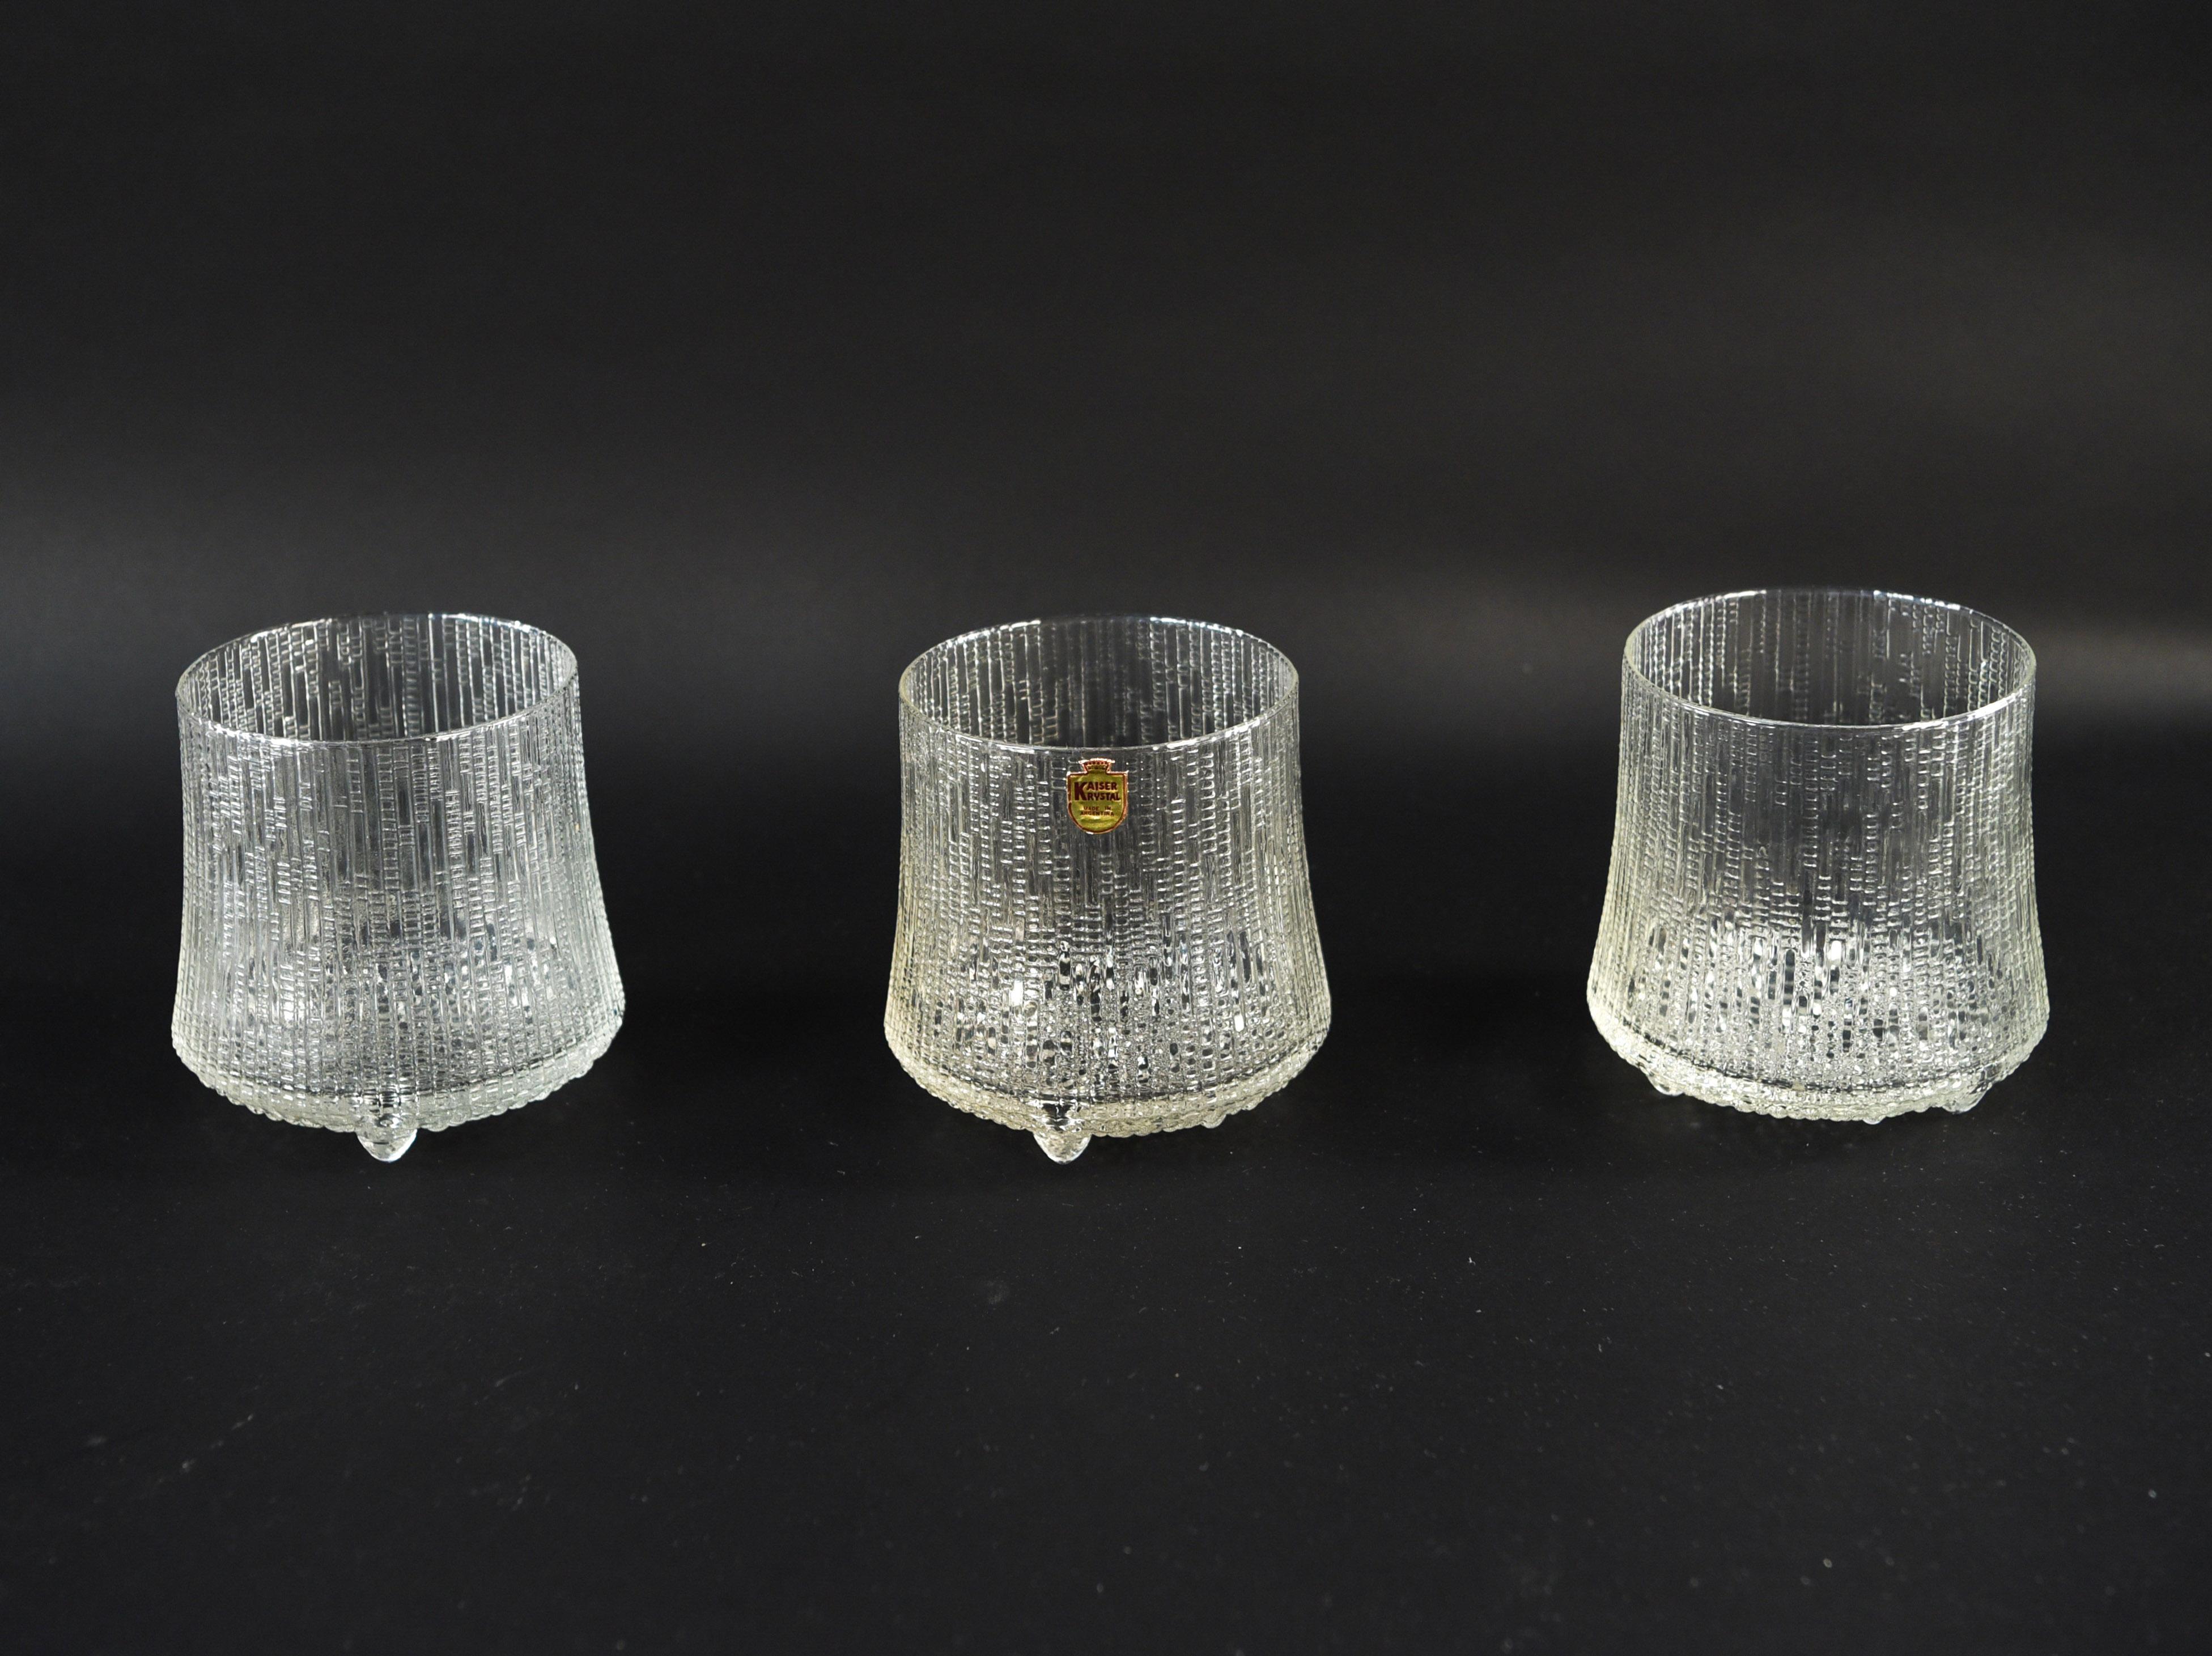 One with Kaiser crystal sticker. Three midcentury ice glass vessels that would make lovely decorative pieces.